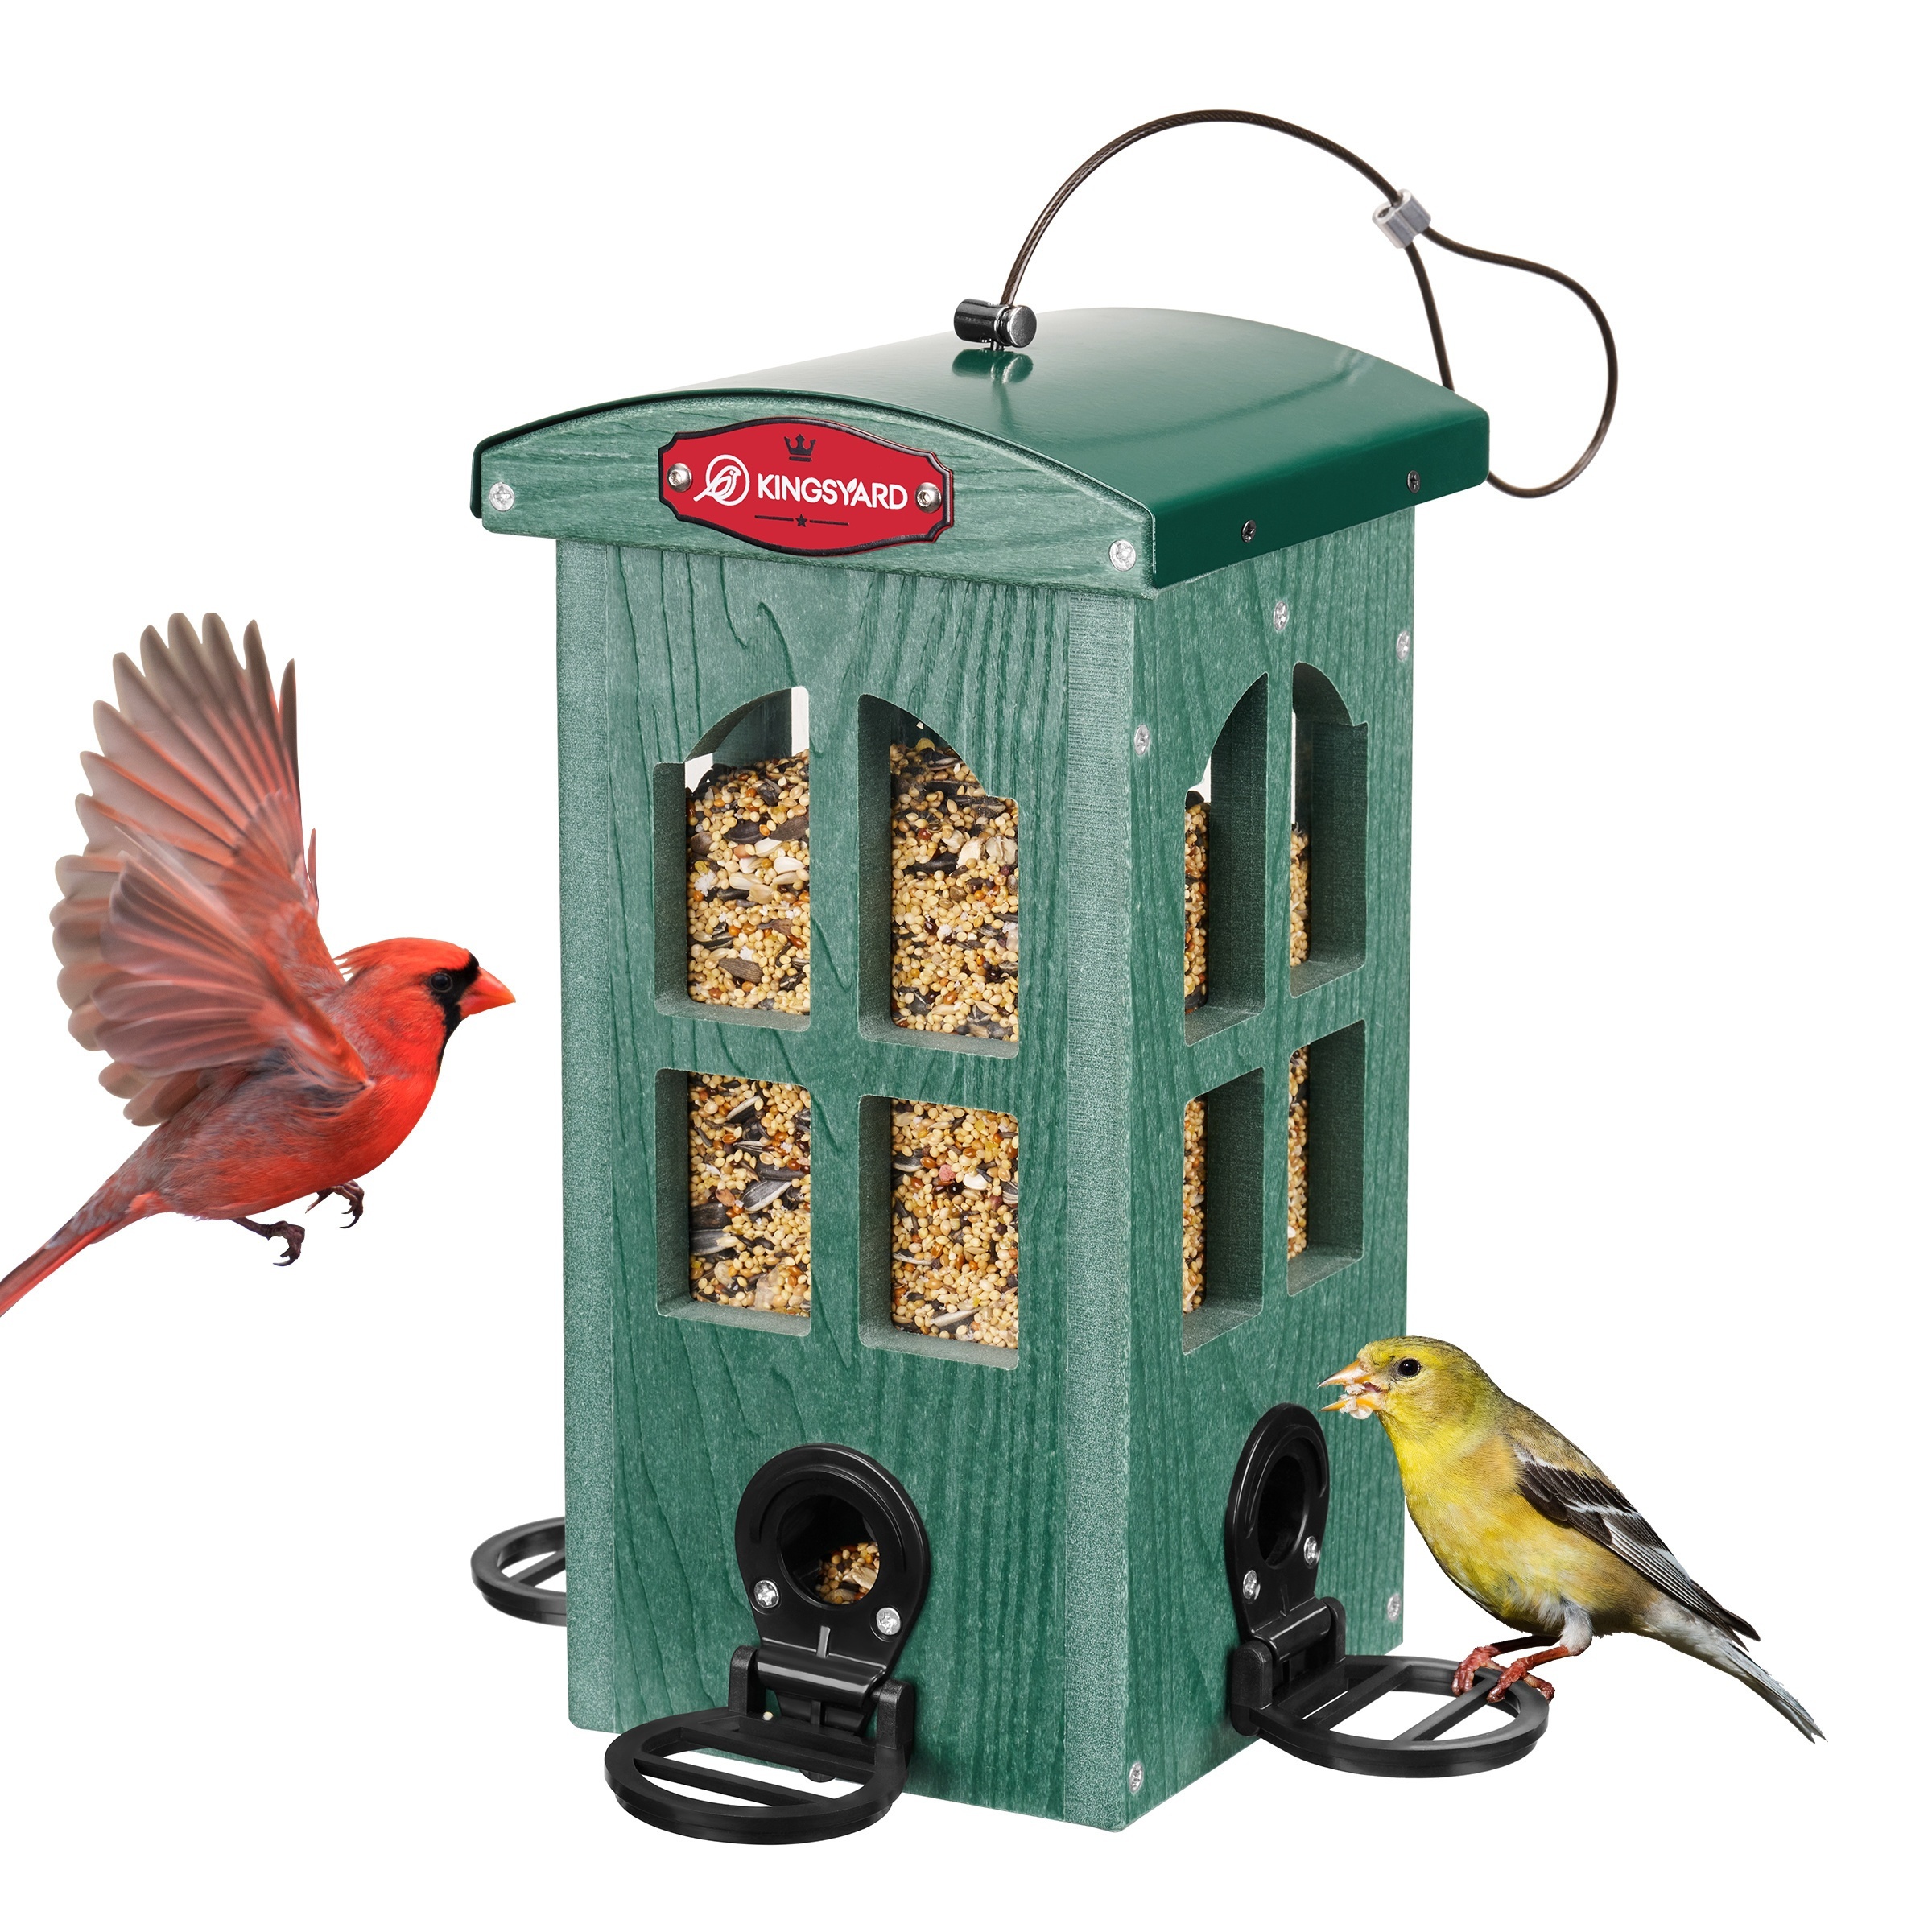 

Kingsyard Phone Booth Bird Feeder With Metal Weatherproof Roof & Mesh Tray, Recycled Plastic Bird Feeders For Outdoors Hanging, 3 Lbs Large Seed Capacity, Garden Yard Decoration